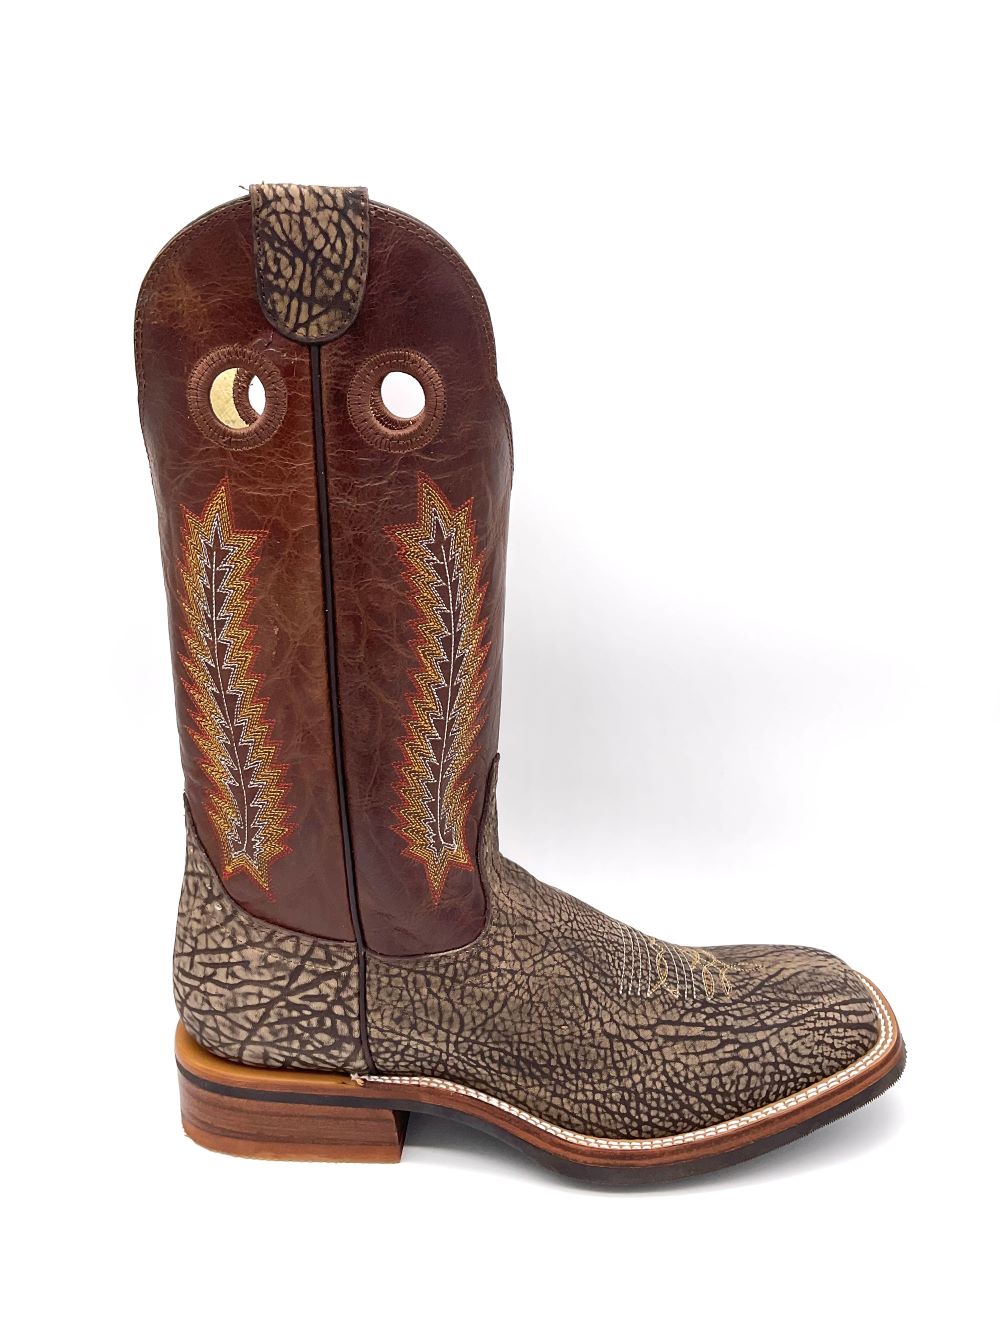 Hondo Boots Men's Roughout Western Boots